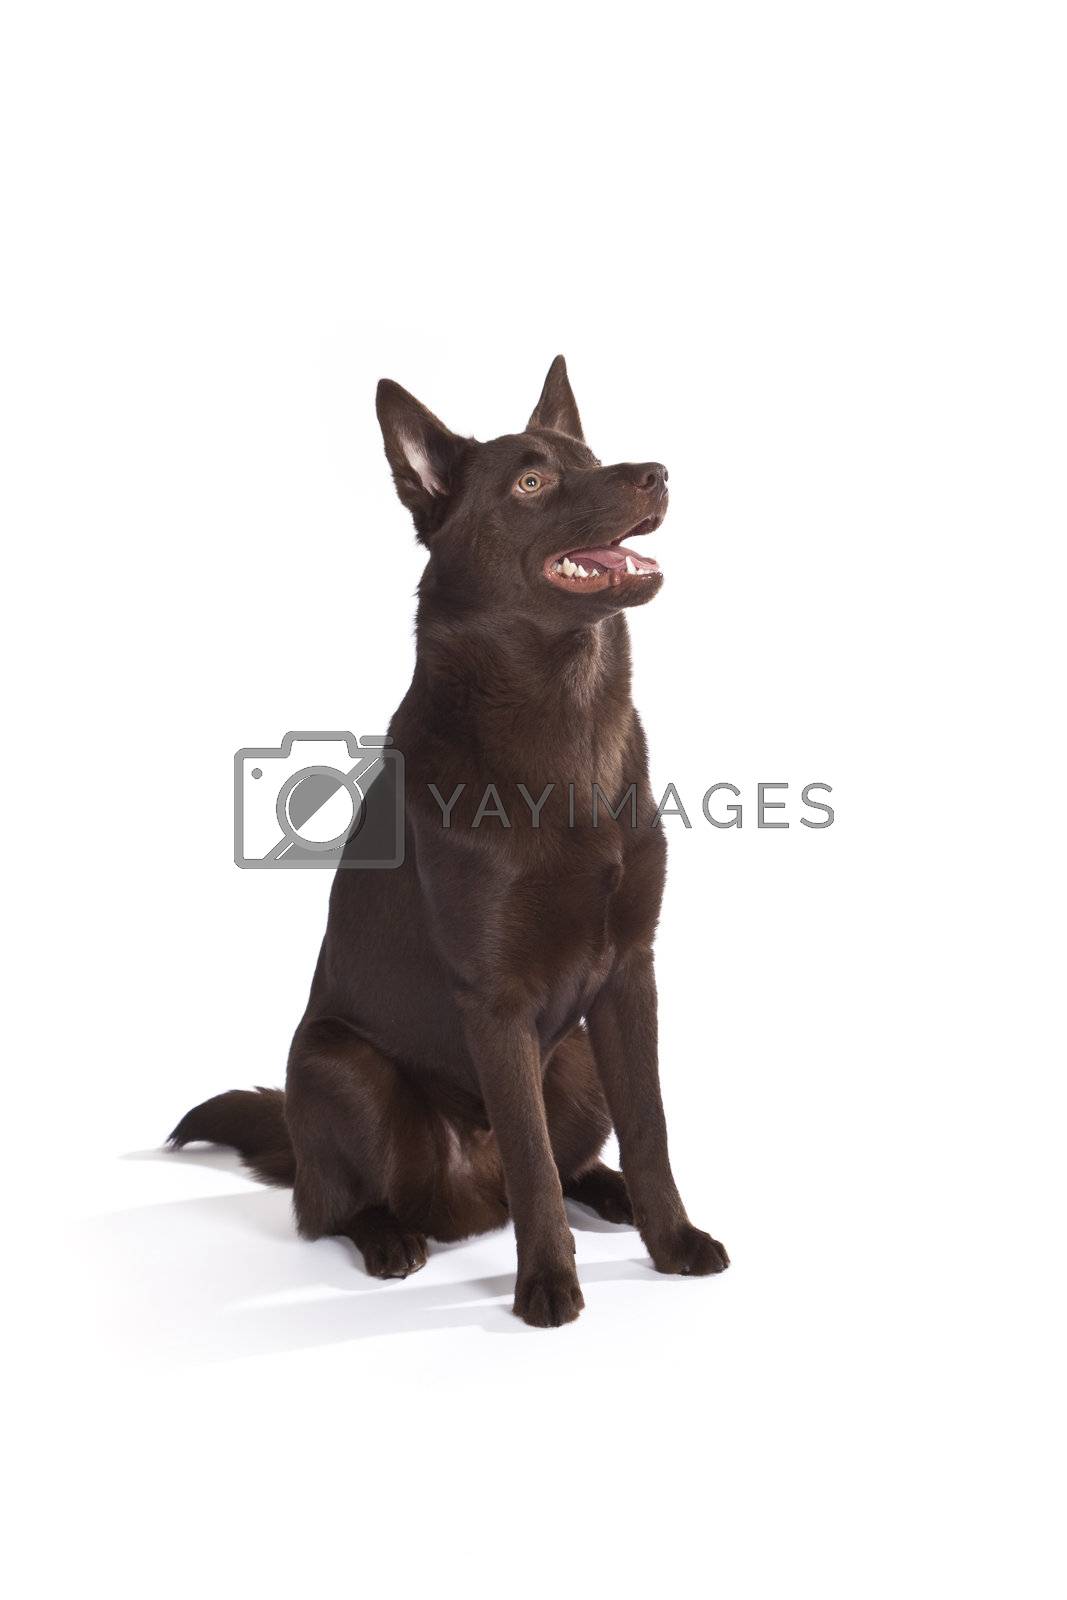 Royalty free image of Cute and funny australian Kelpie by mjp